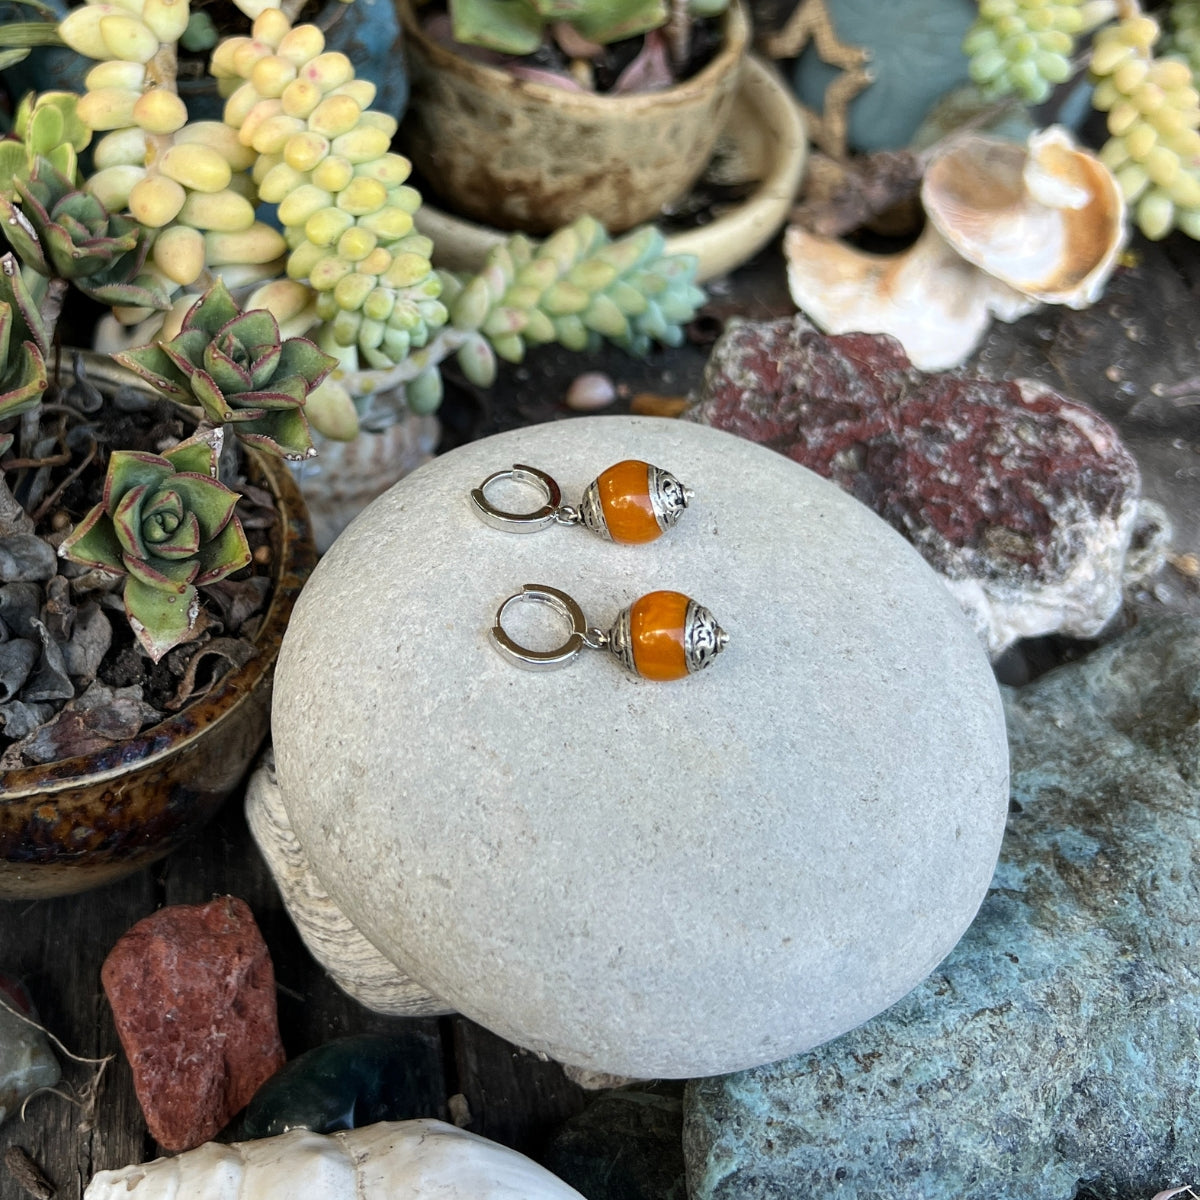 At the heart of the "Himalaya Harmony Earrings"  is a piece of Carnelian gemstone. Carnelian is known as the self-esteem gemstone because it is such a powerful motivator. It helps you to overcome the various parts of your personality that may be holding you back allowing you to claim your destiny. 